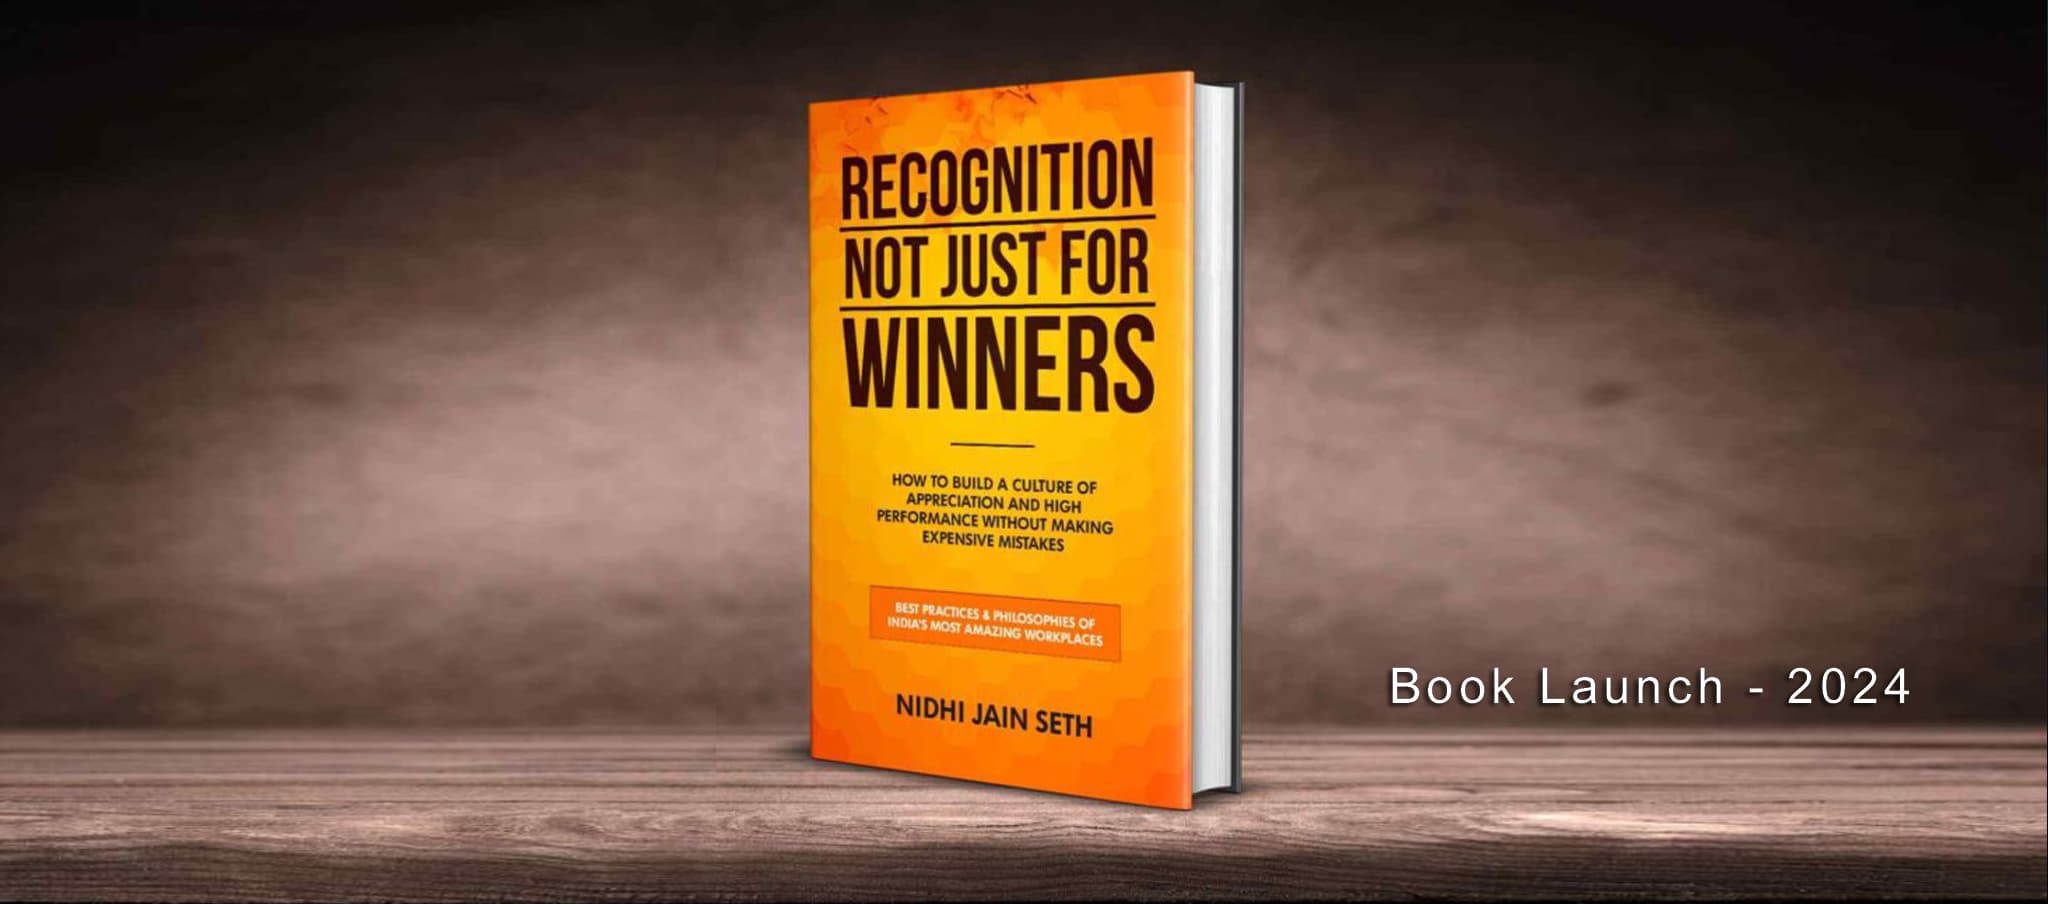 Book on Recognition not just for winners to be launched in 2024.